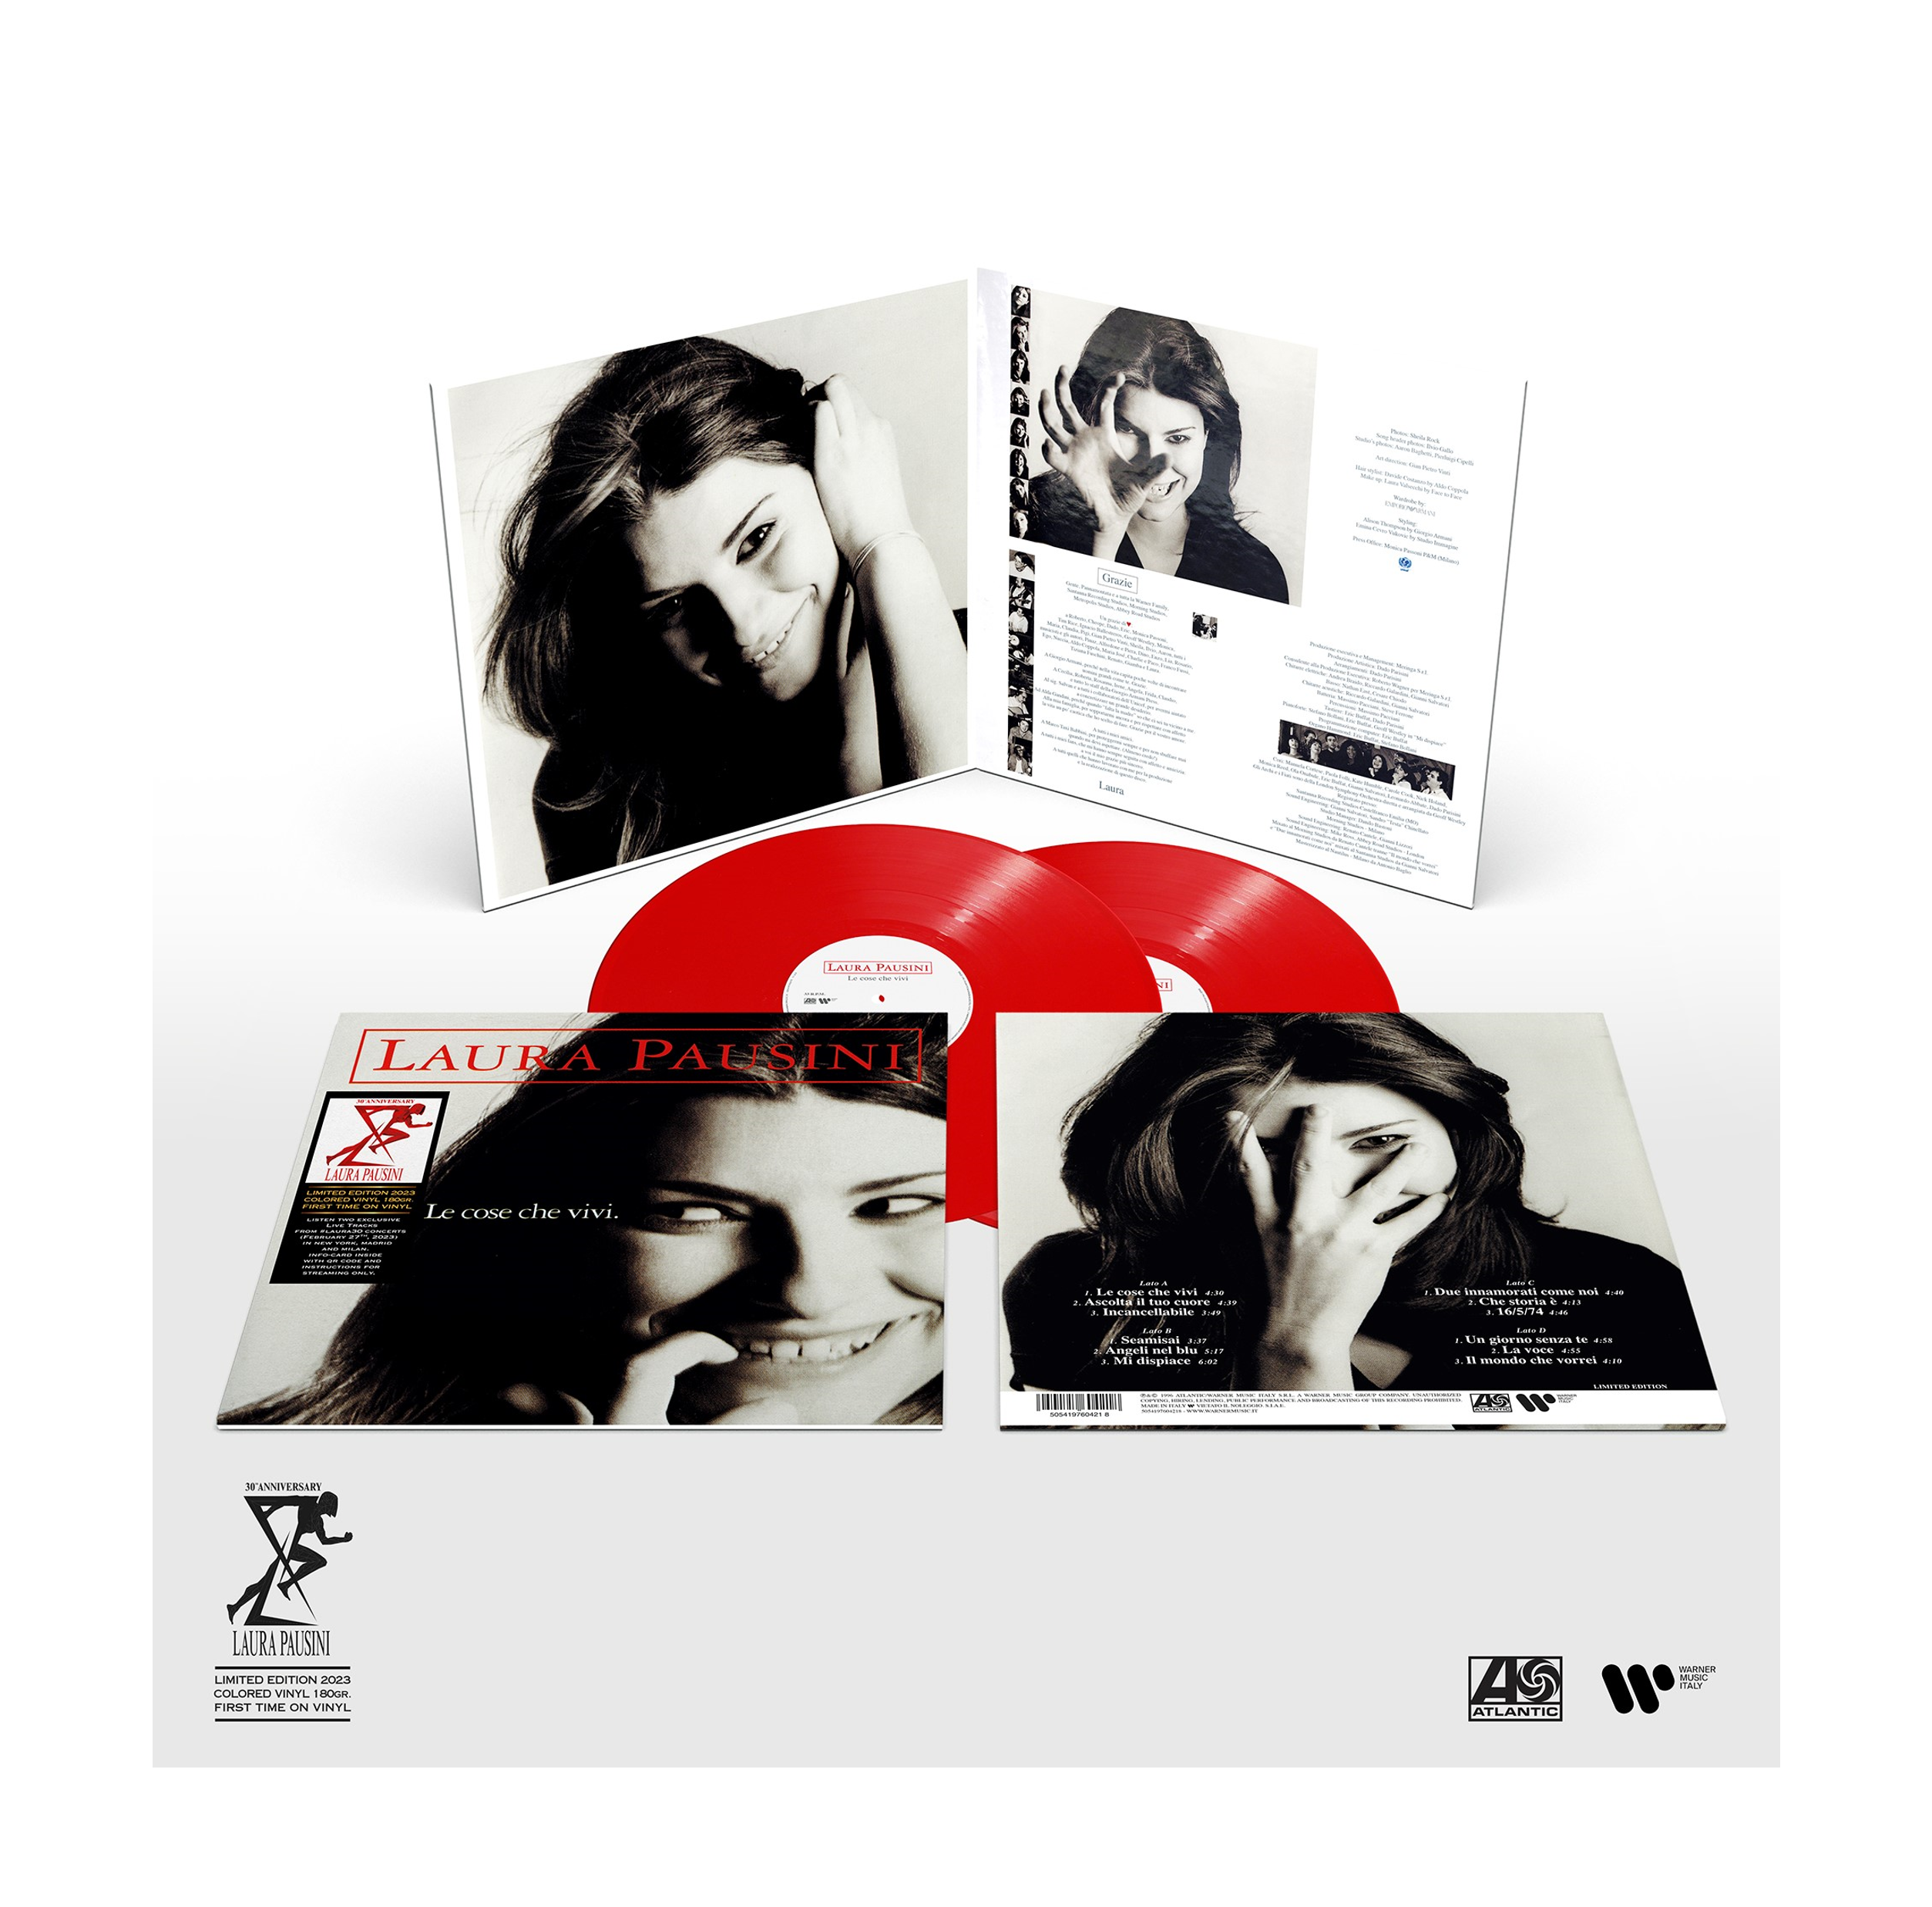 LE COSE CHE VIVI (2LP 180g Red Vinyl. Limited & Numbered Edition)